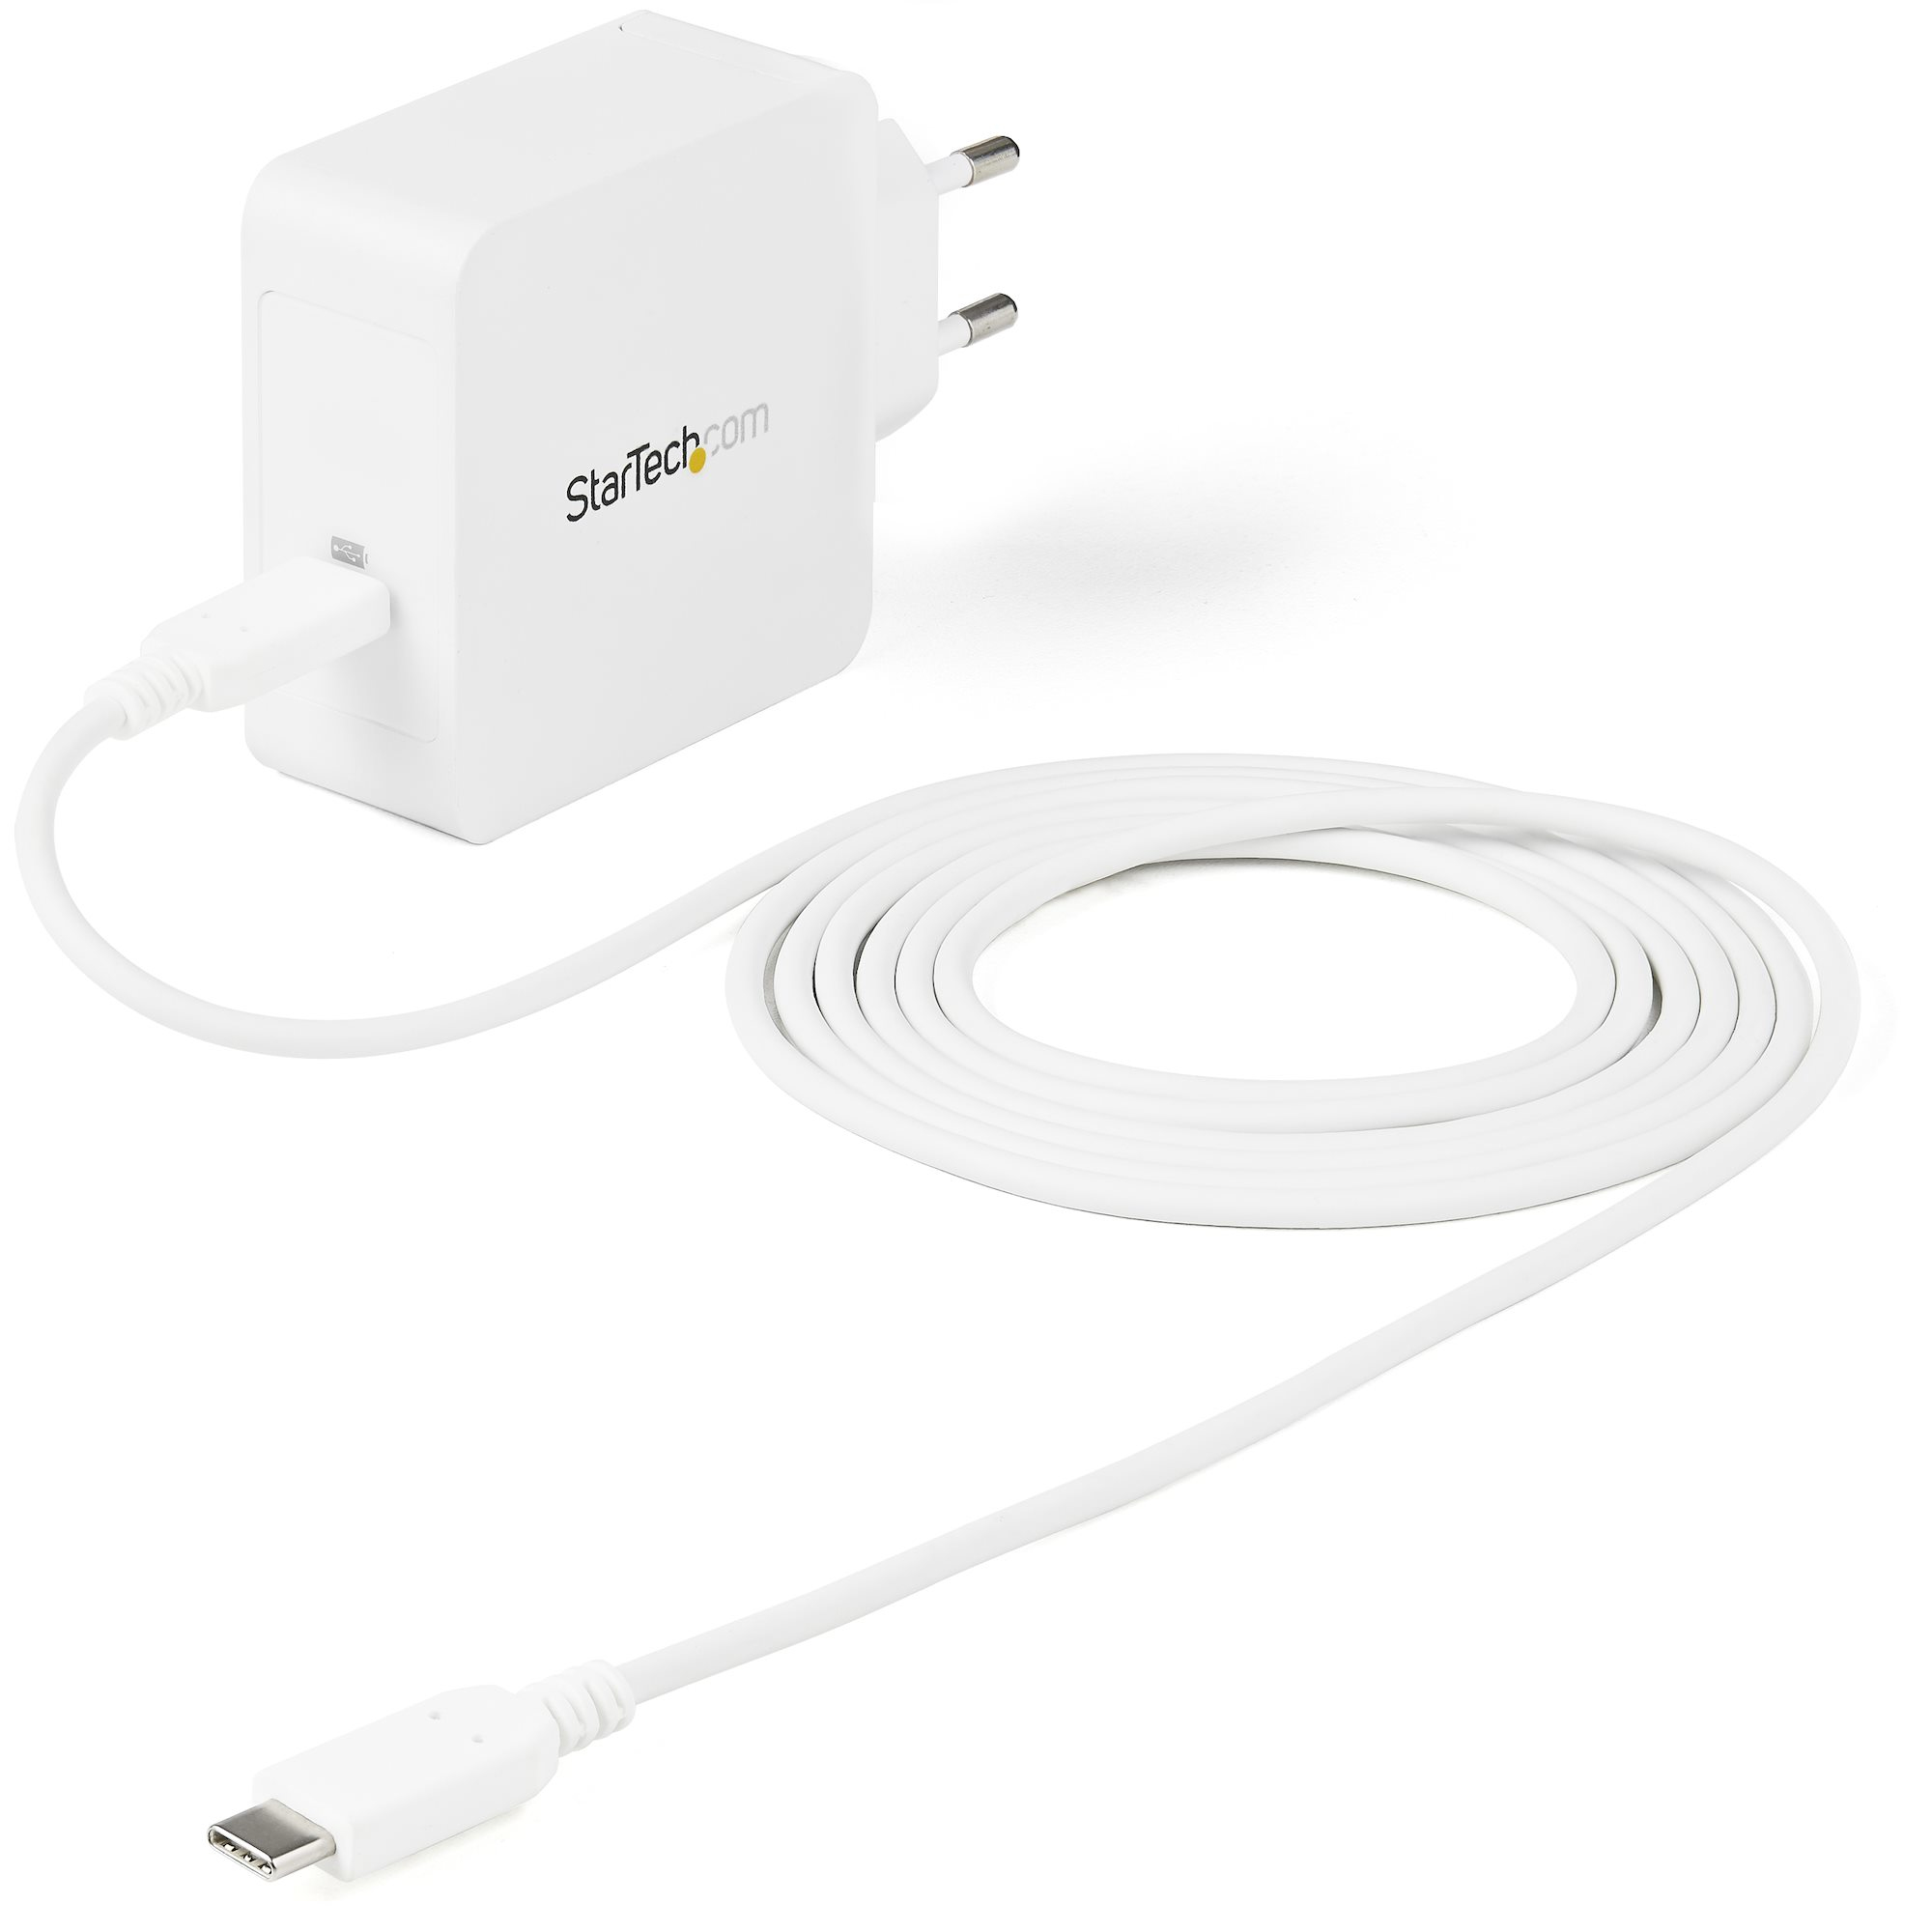 StarTech.com USB C Wall Charger, USB C Laptop Charger 60W PD, 6ft/2m Cable, Universal Compact Type C Power Adapter, Dell XPS/Lenovo X1 Carbon, HP EliteBook, MacBook, USB IF/CE Certified - 60W PD3.0 Wall Charger (WCH1CEU)